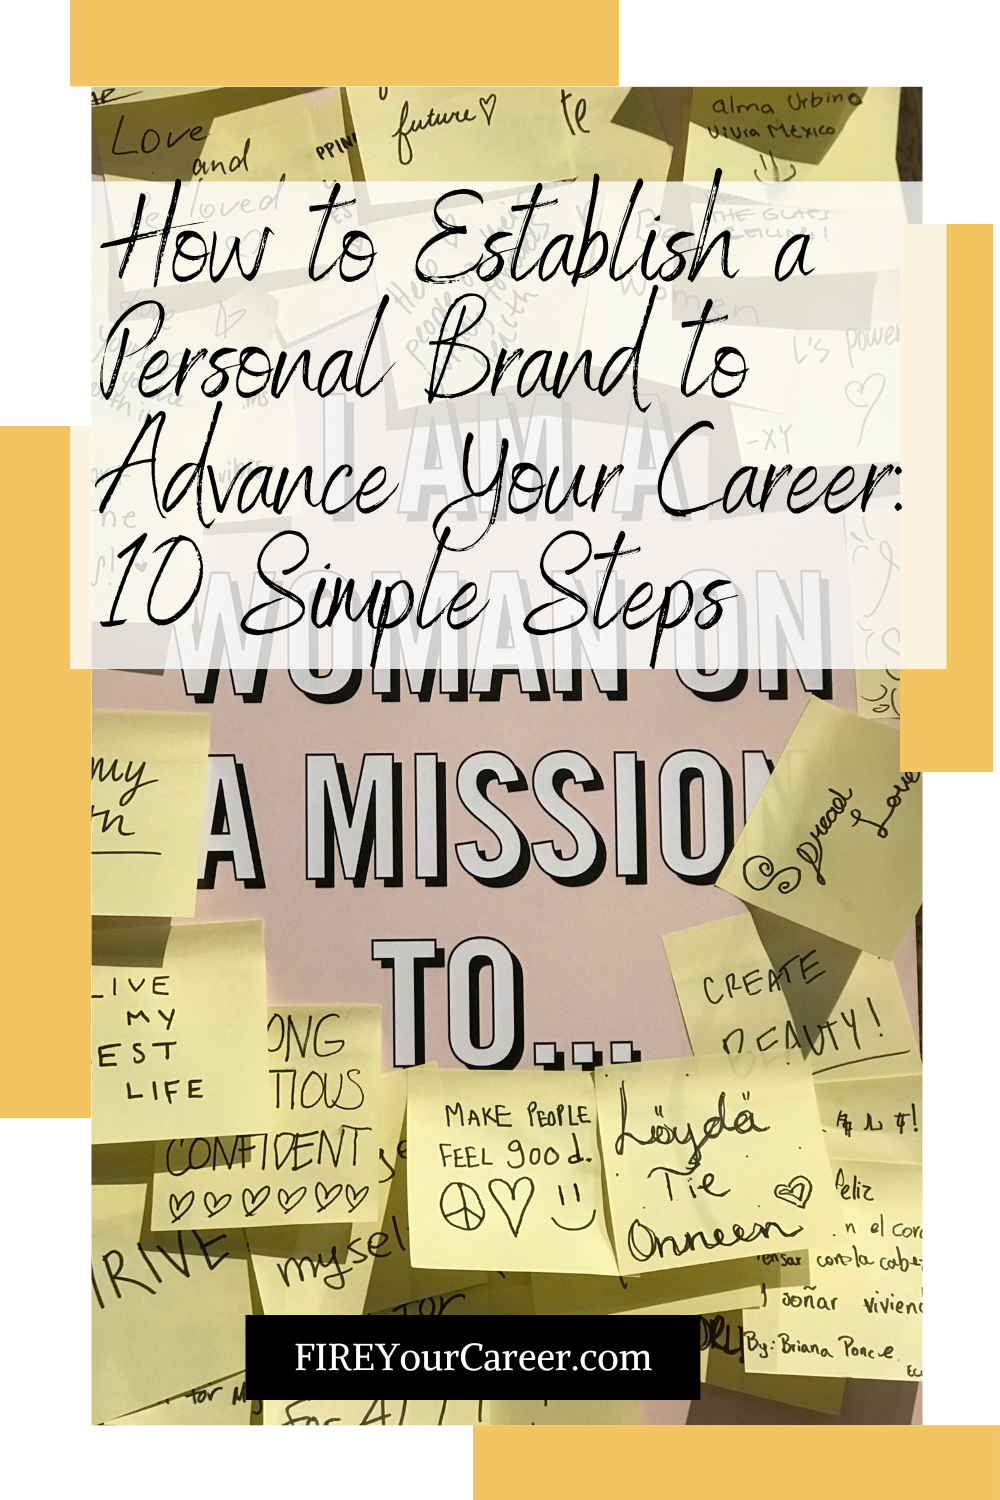 V2 How to Establish a Personal Brand to Advance Your Career 10 Simple Steps Pinterest (1)